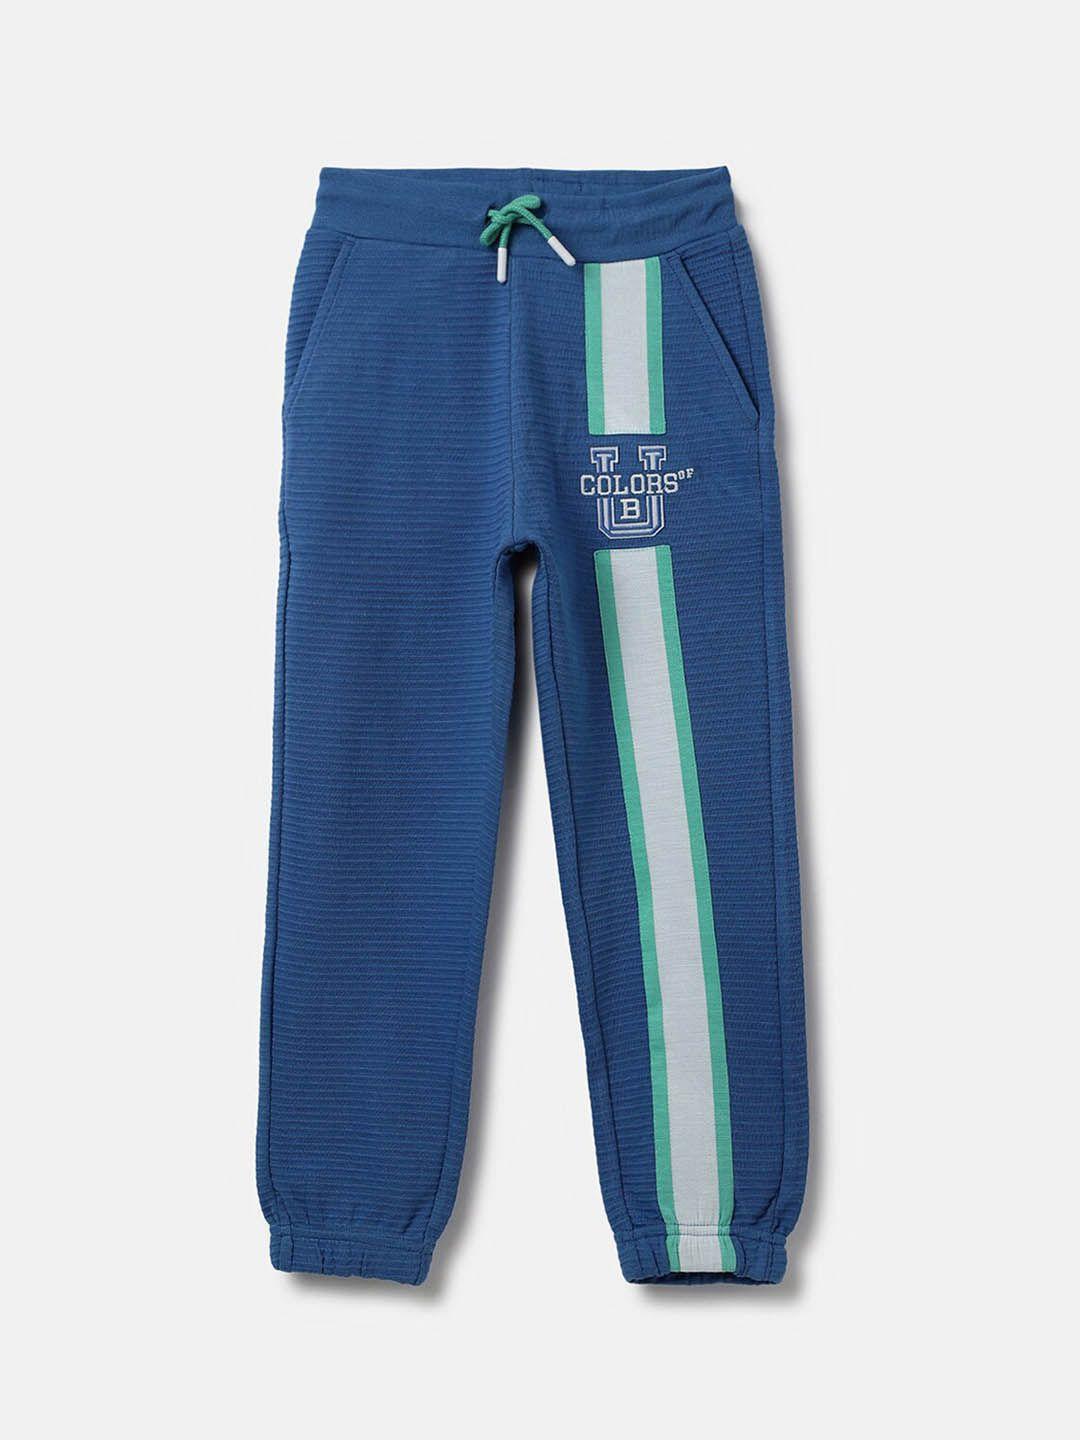 united colors of benetton boys ribbed & striped cotton joggers